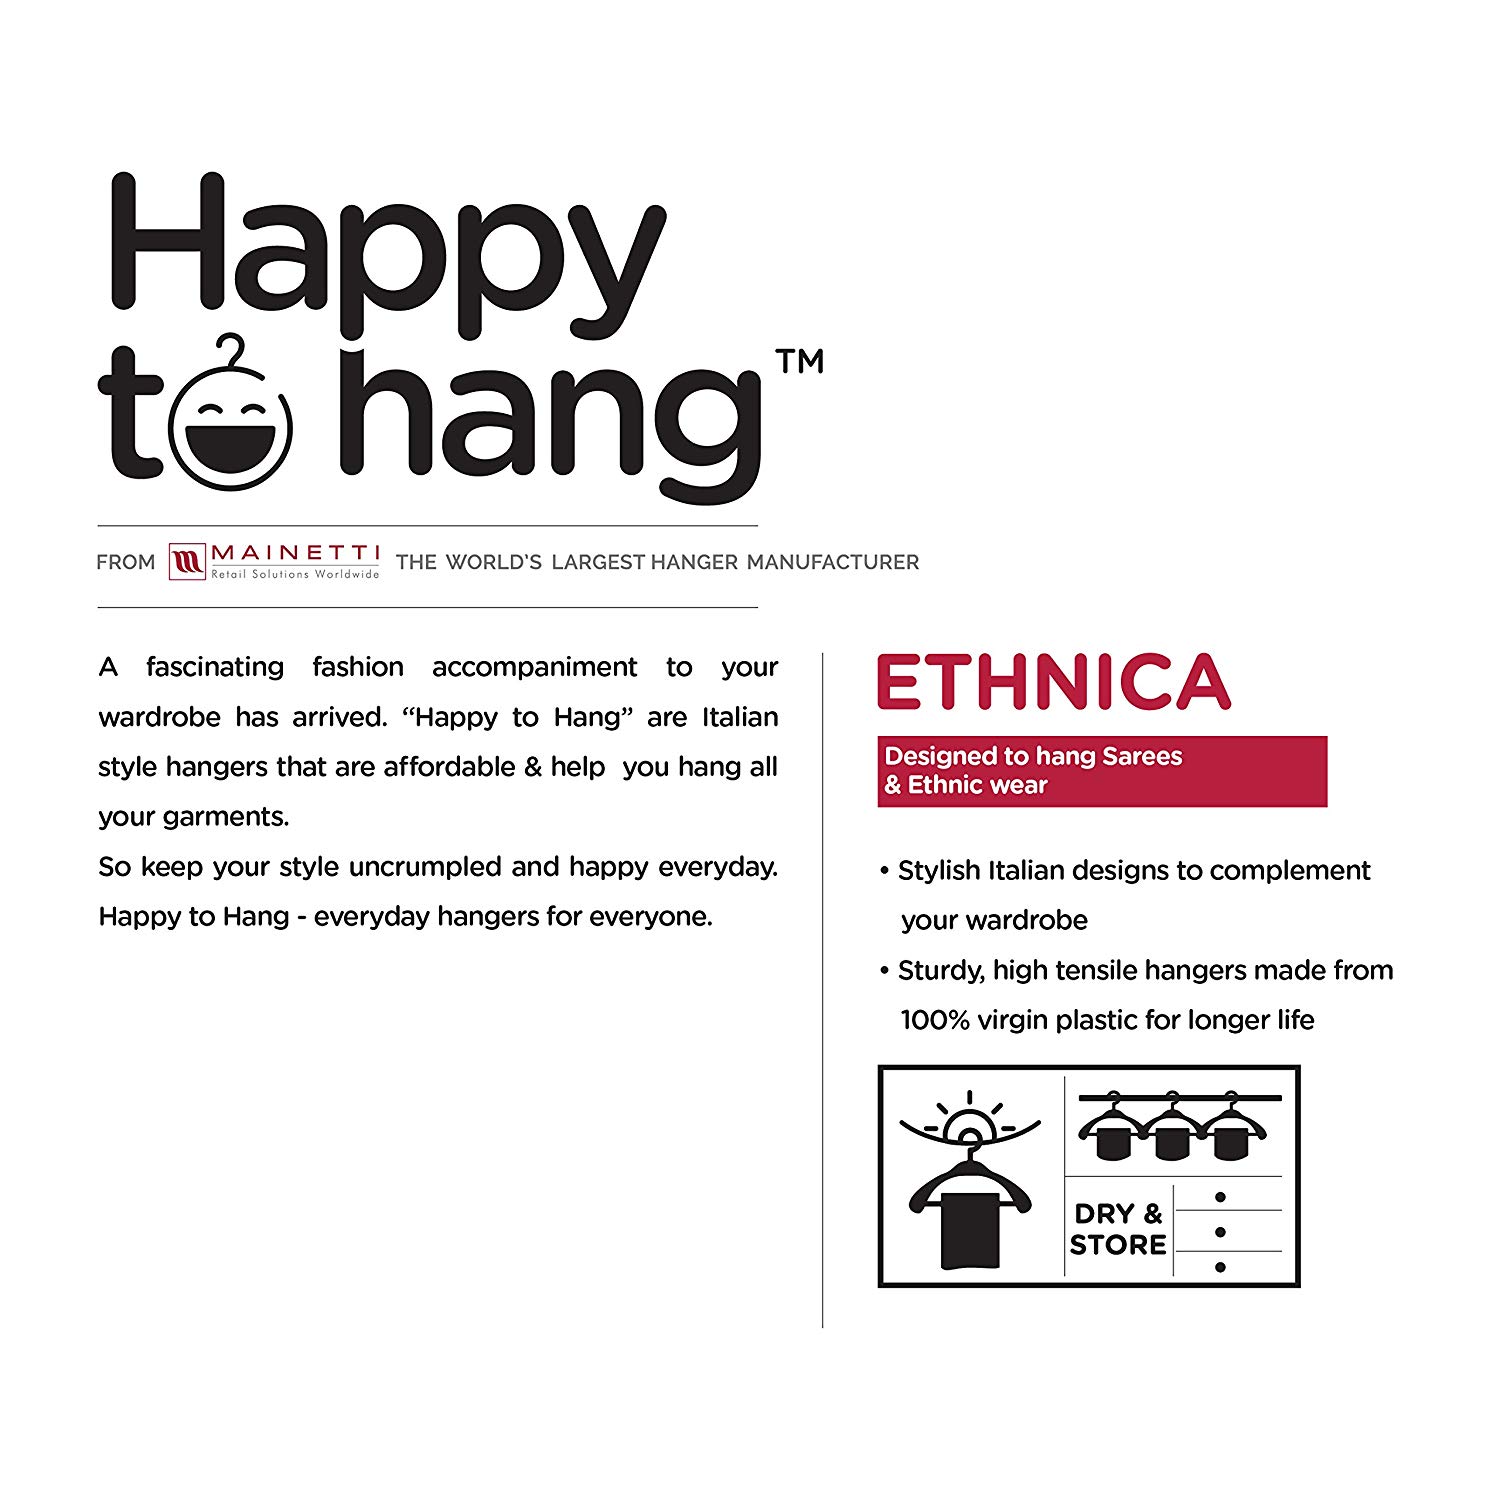 Happy-To-Hang-Ethnica-Polypropylene-Hanger-(Yellow-and-Red)-mainetti